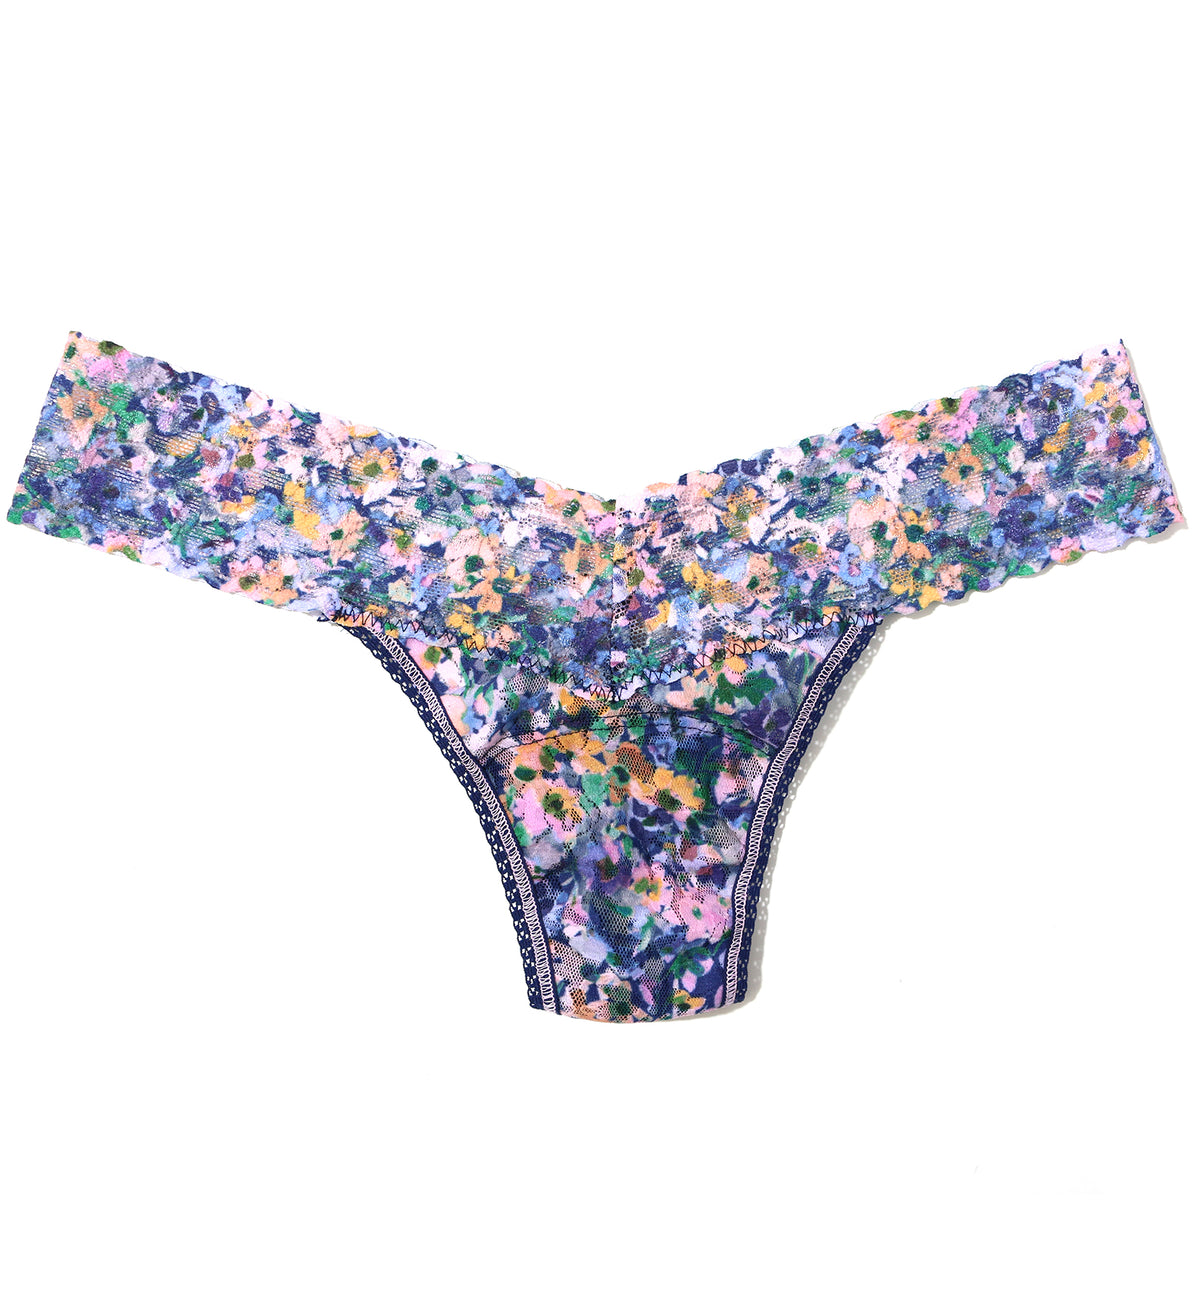 Hanky Panky Signature Lace Printed Low Rise Thong (PR4911P),Staycation - Staycation,One Size